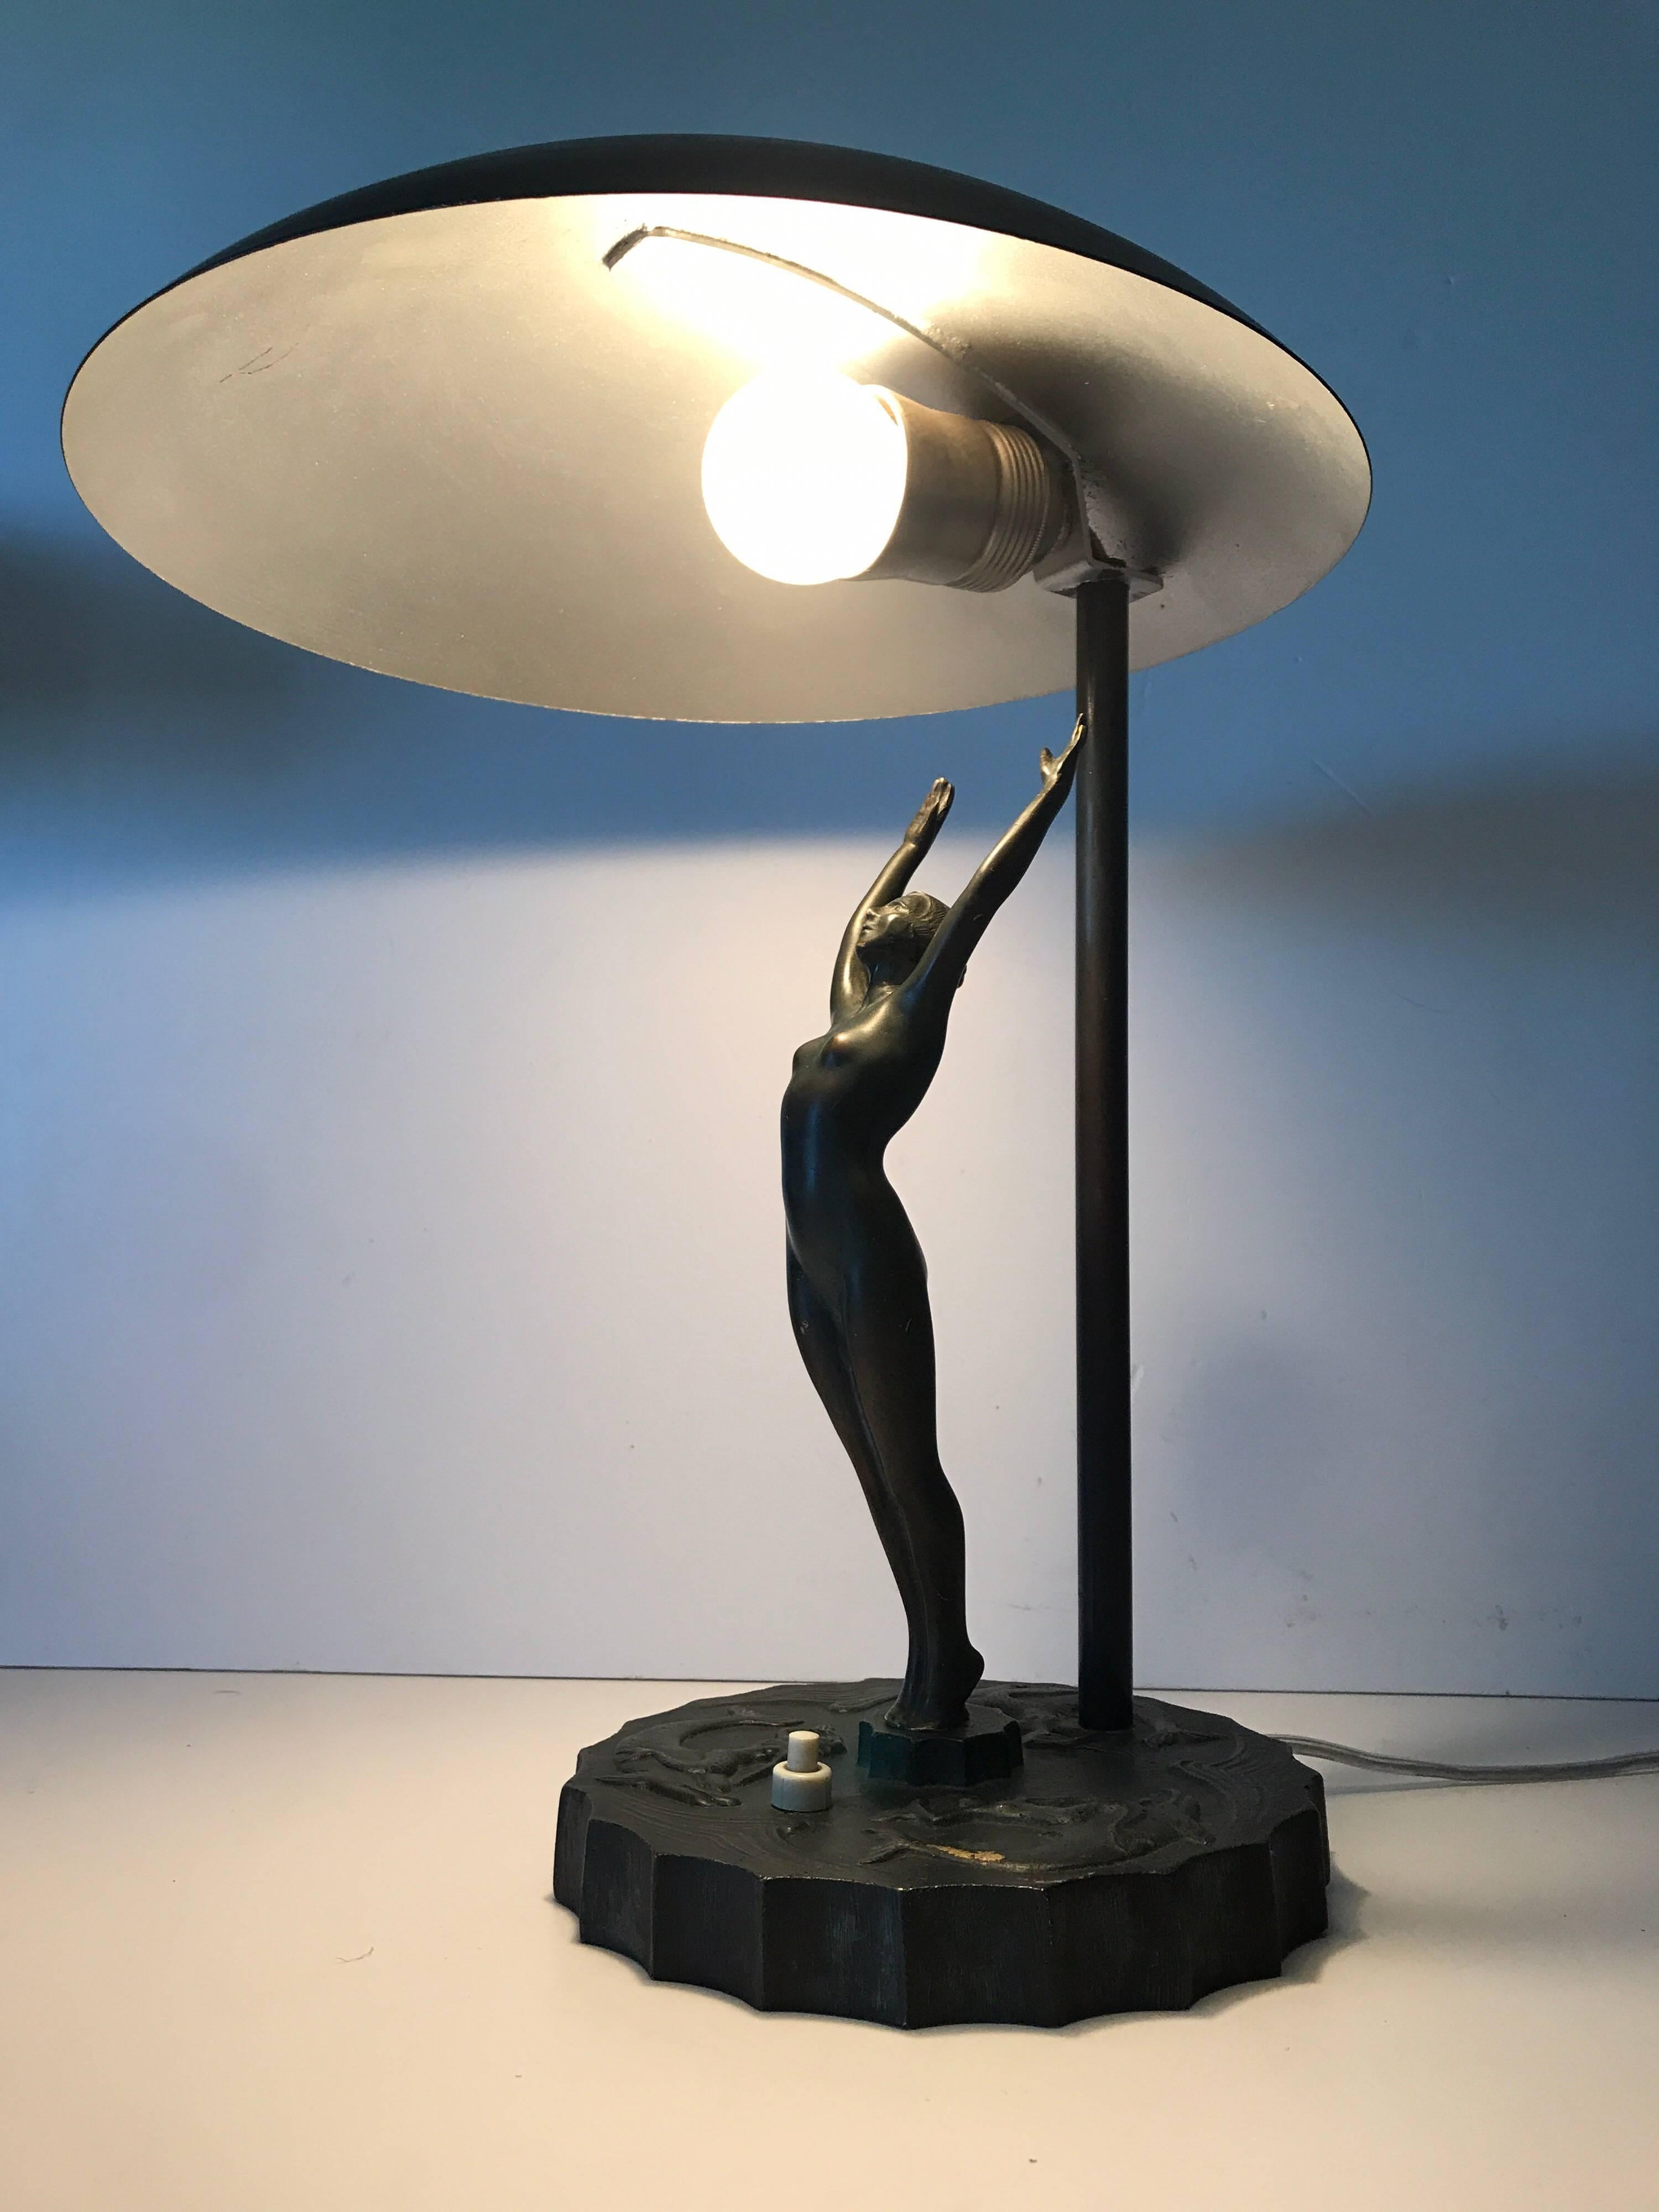 Rare Swedish Art Deco Bronze and Steel Table Lamp.
This lamp was most likely made at Herman Bergmans bronze casting factory. It has three dolfins and mermaids cast in relief to the base and the woman in solid bronze stretching up to the light. This